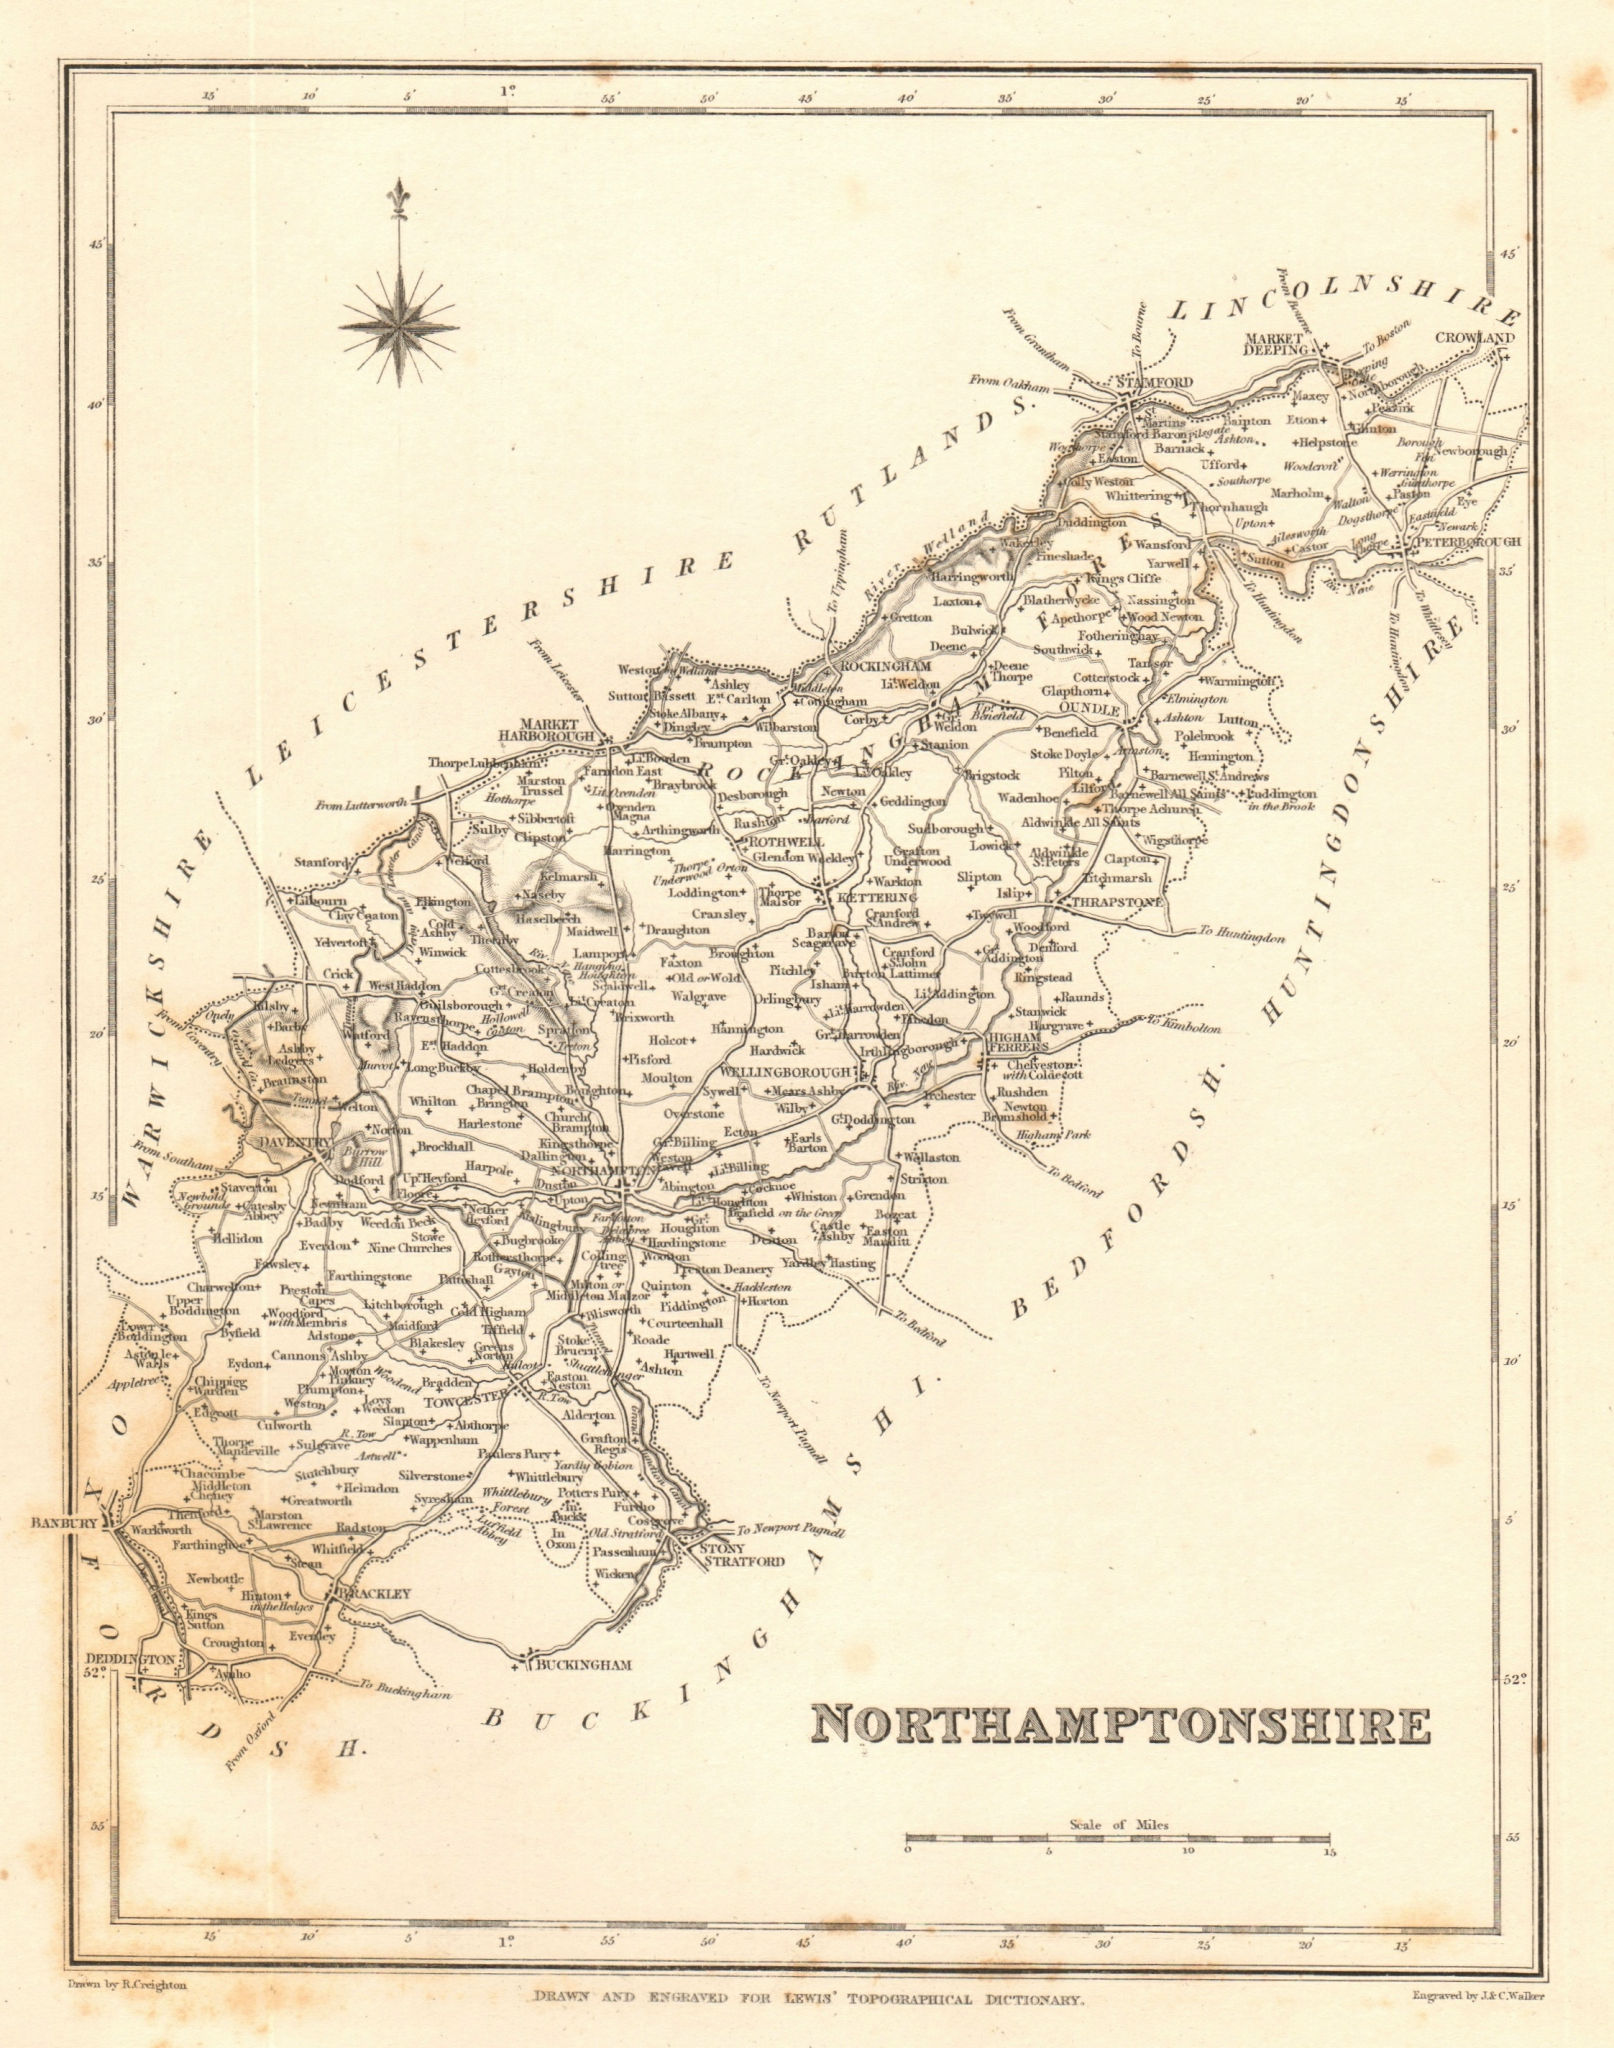 Associate Product Antique county map of NORTHAMPTONSHIRE by Walker & Creighton for Lewis c1840